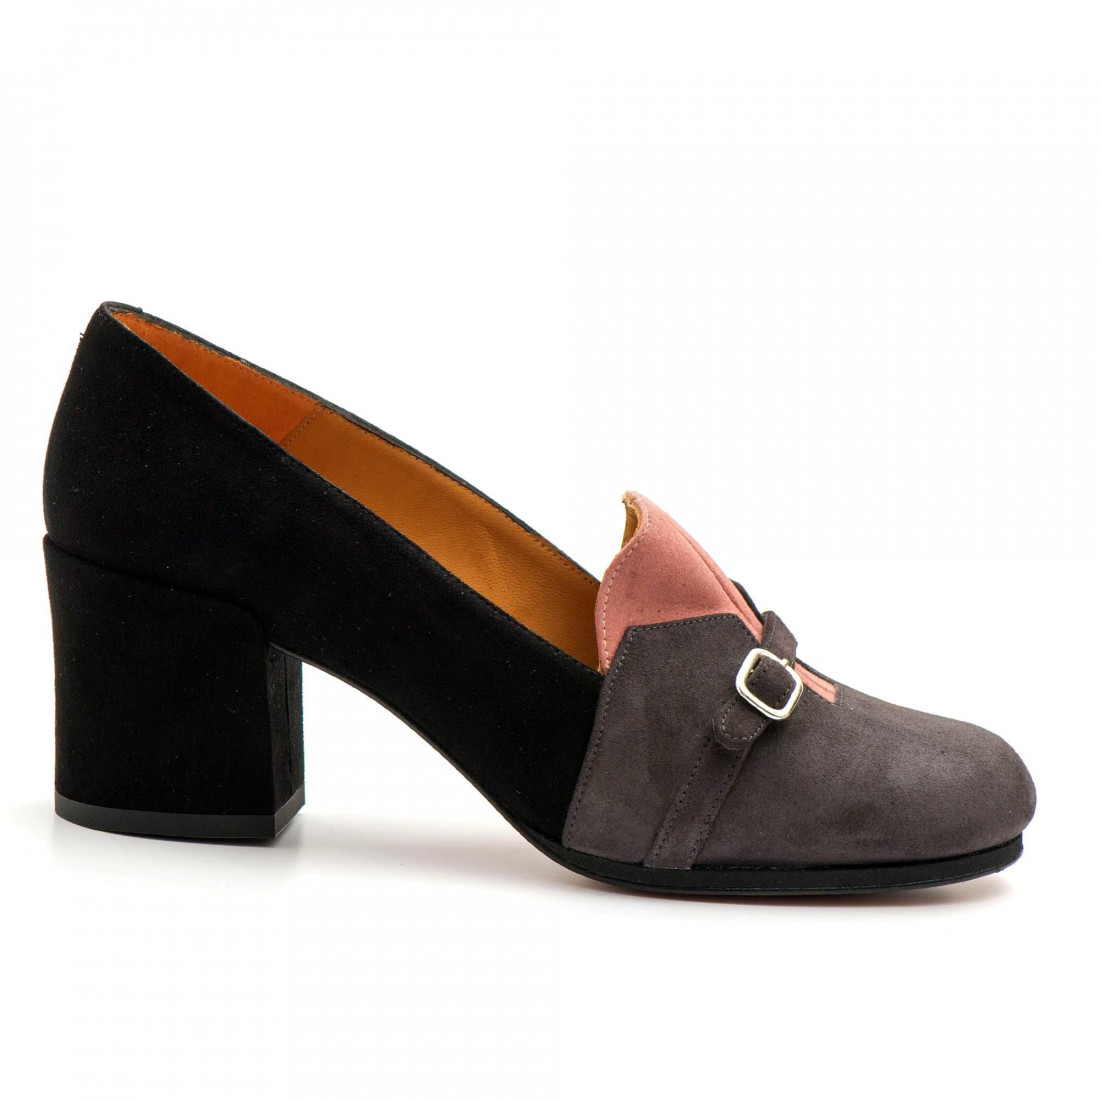 Medium heeled Audley Thais shoes in multicolor suede